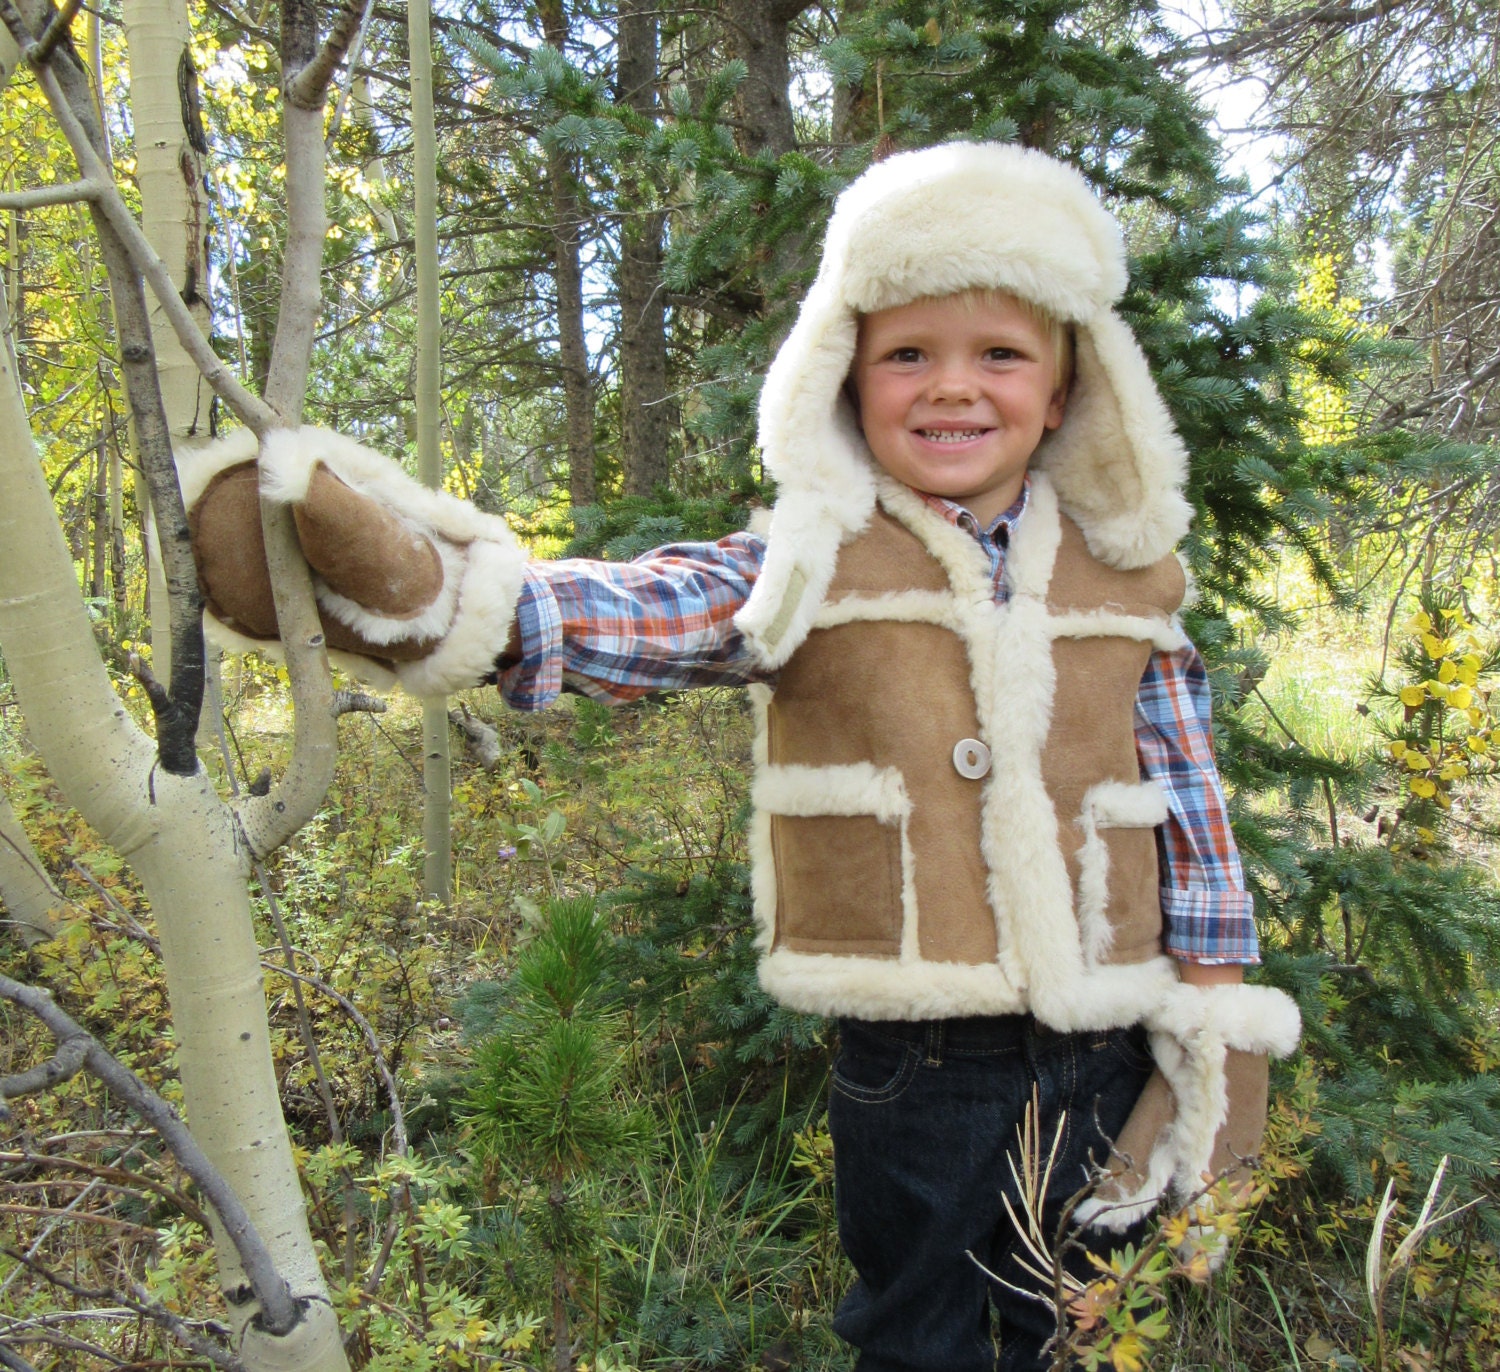 Shearling Coat S00 - New - For Baby